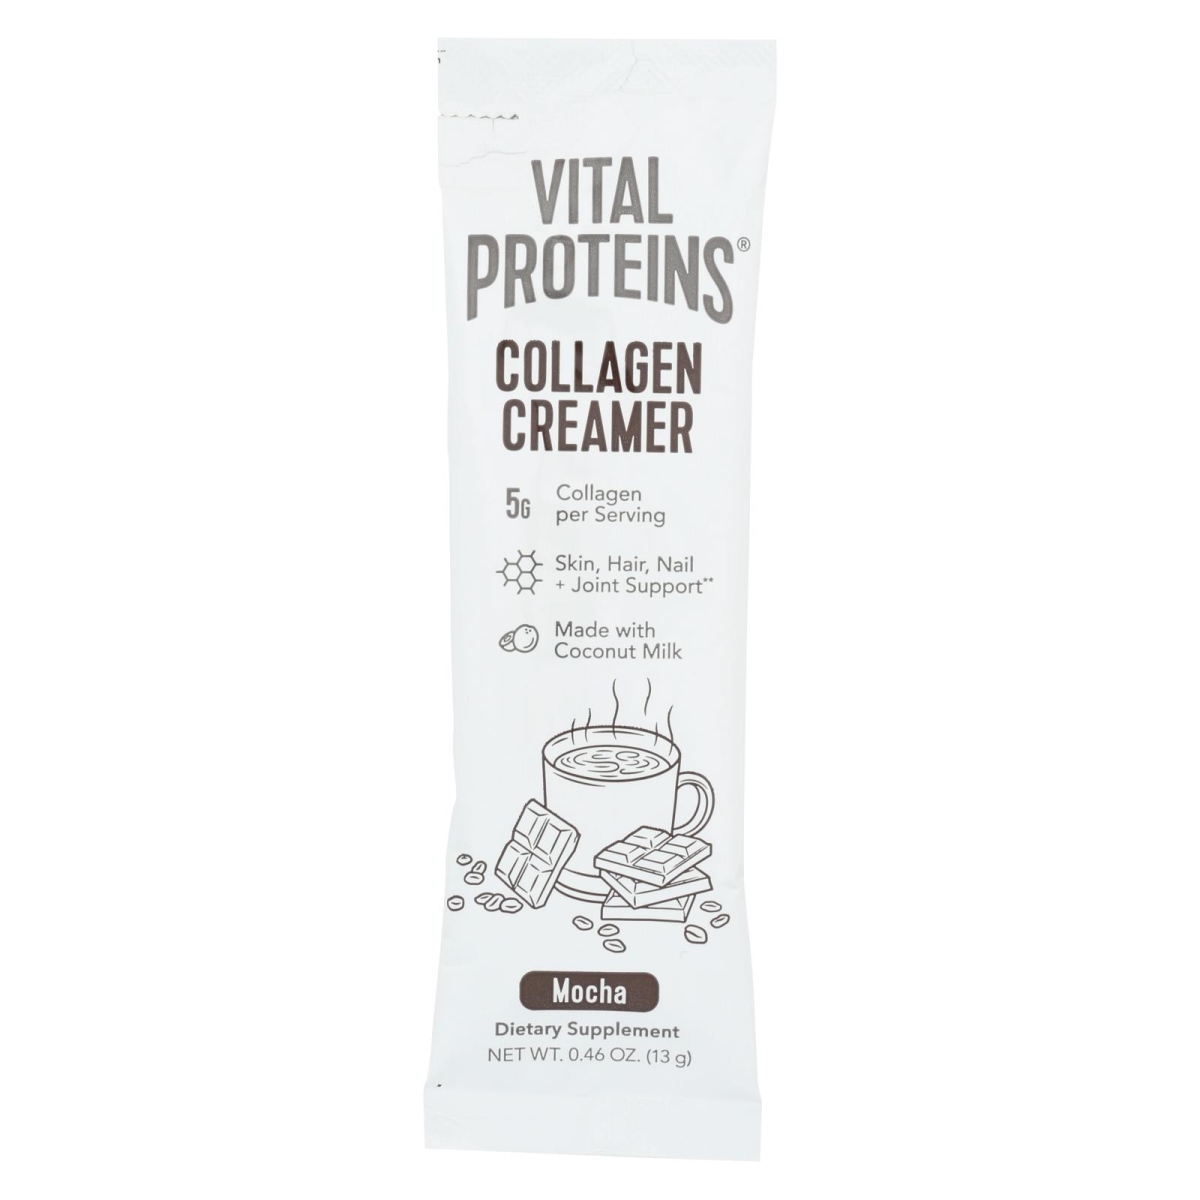 Picture of Vital Proteins HG2316438 0.46 oz Collagen Cremer Mocha Dietary Supplement - Case of 14